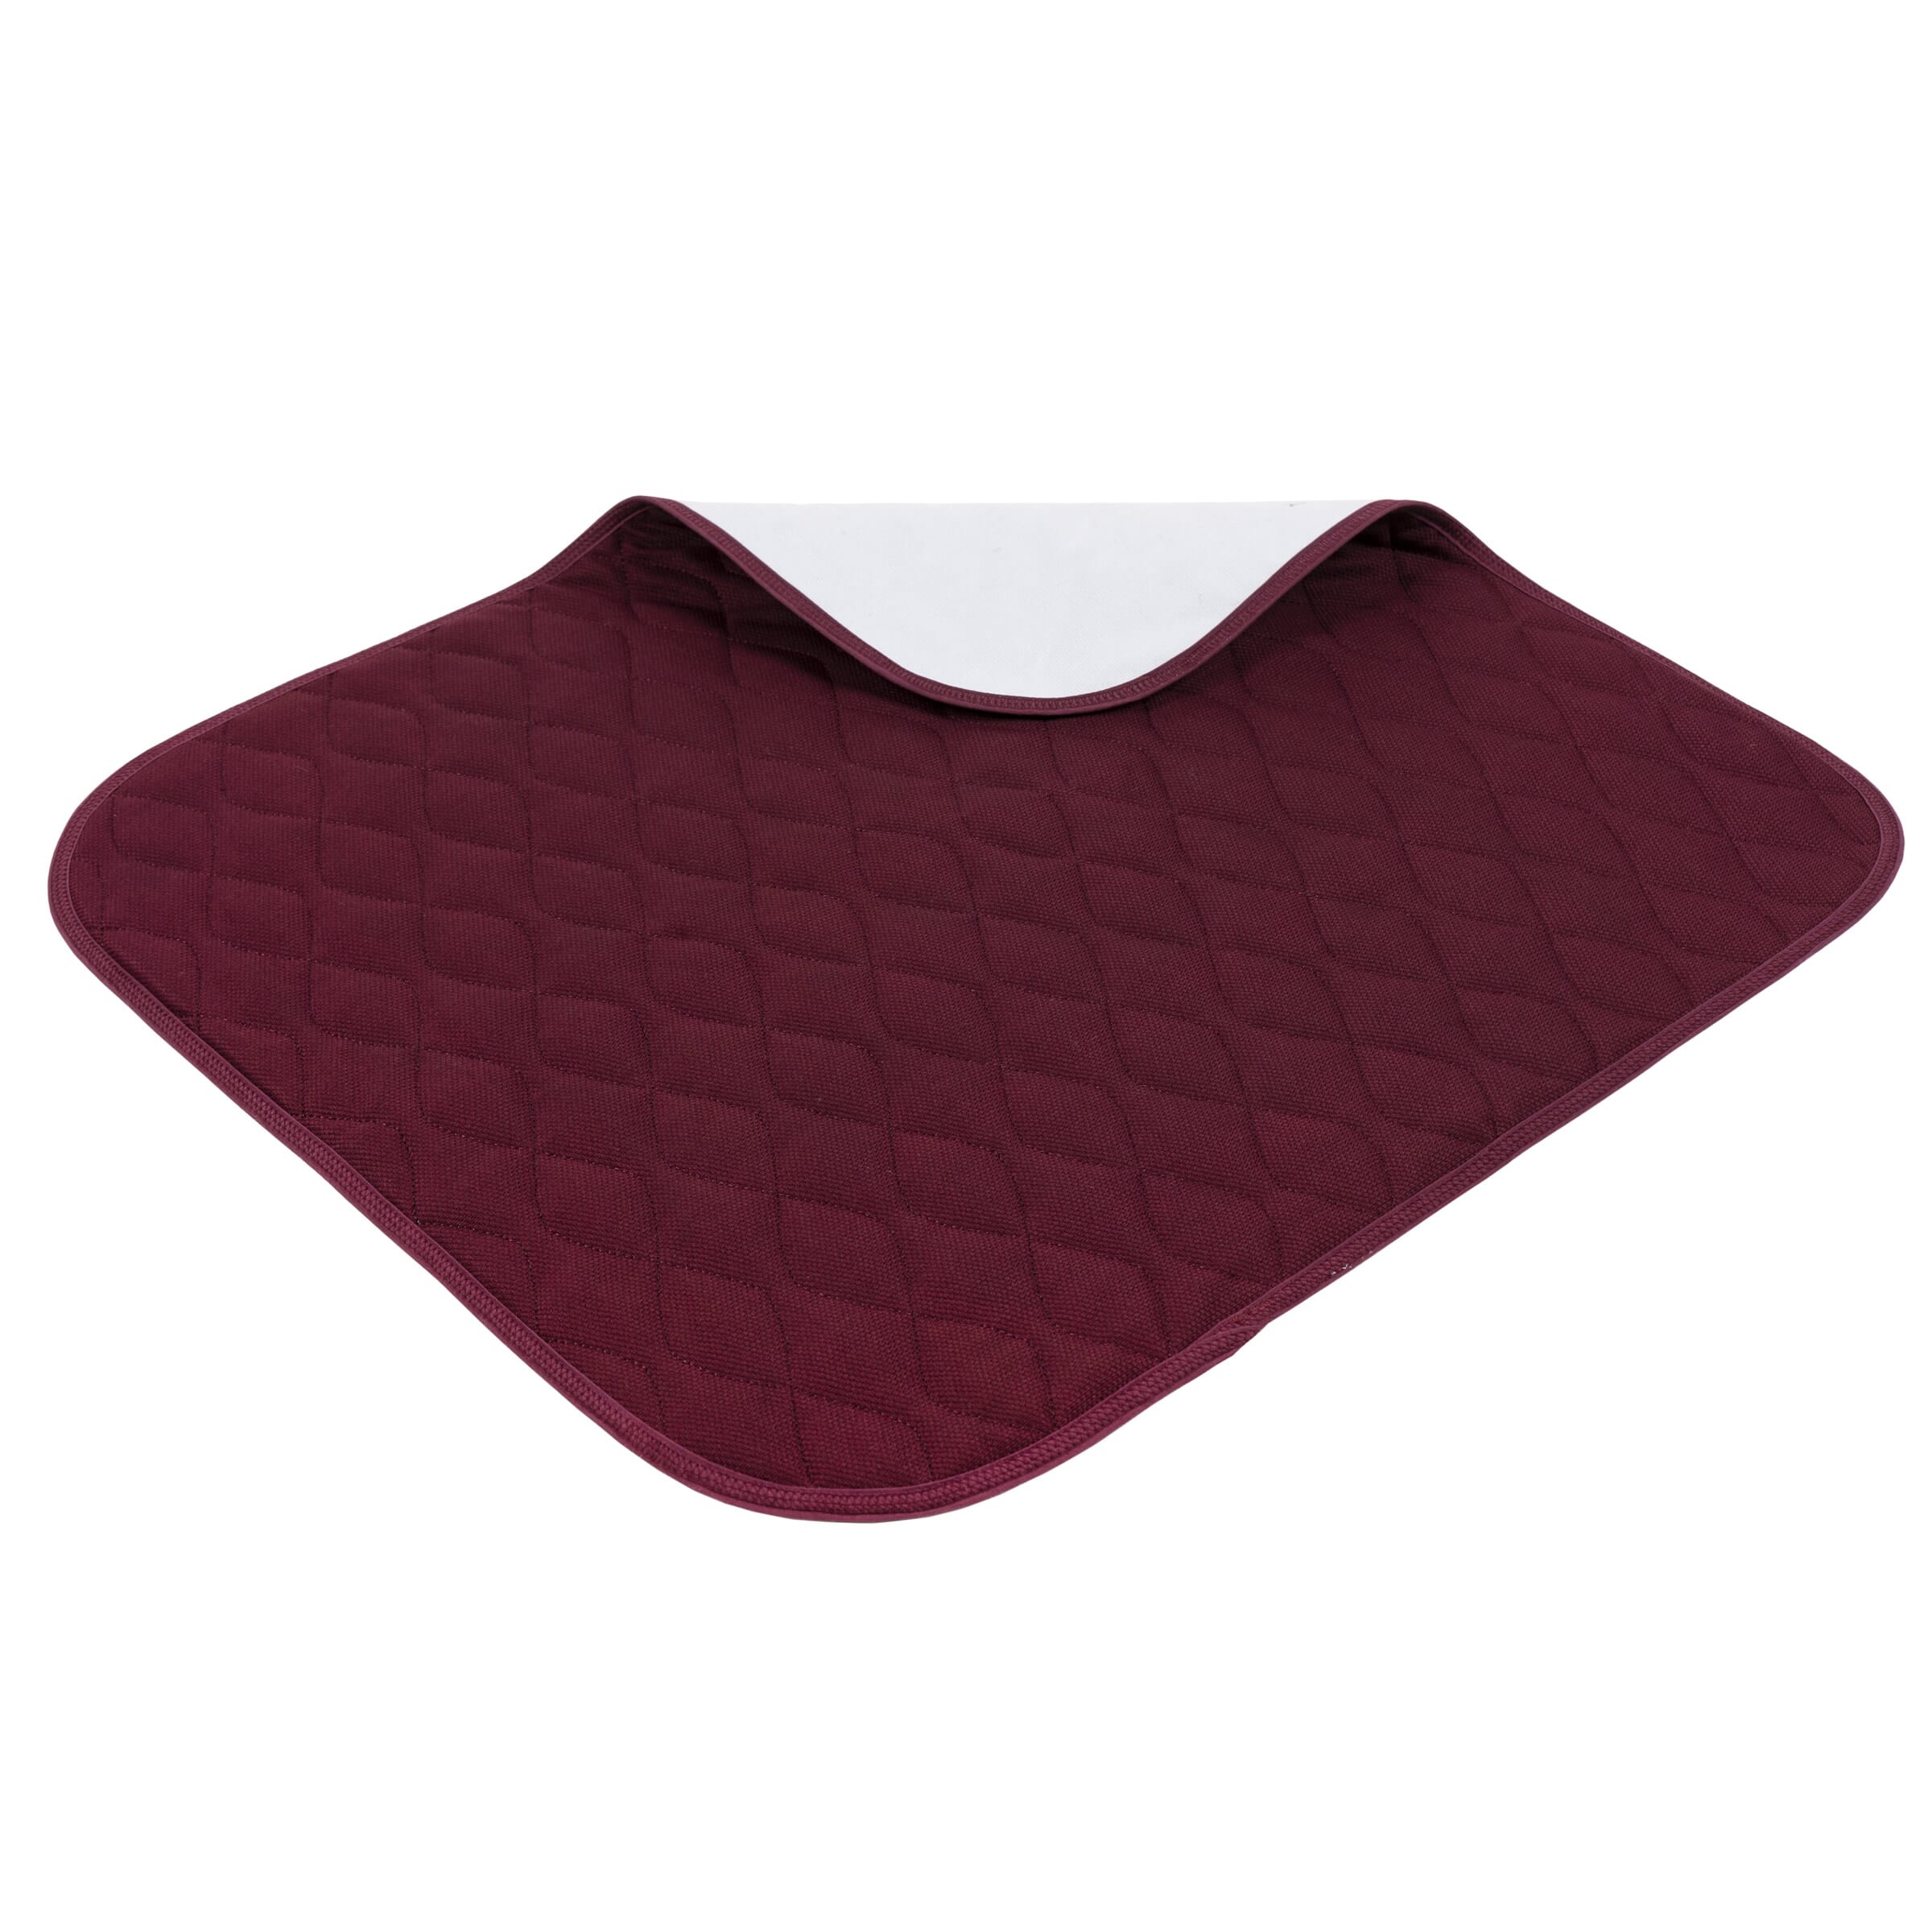 Incontinence Chair Pads - Red from Essential Aids